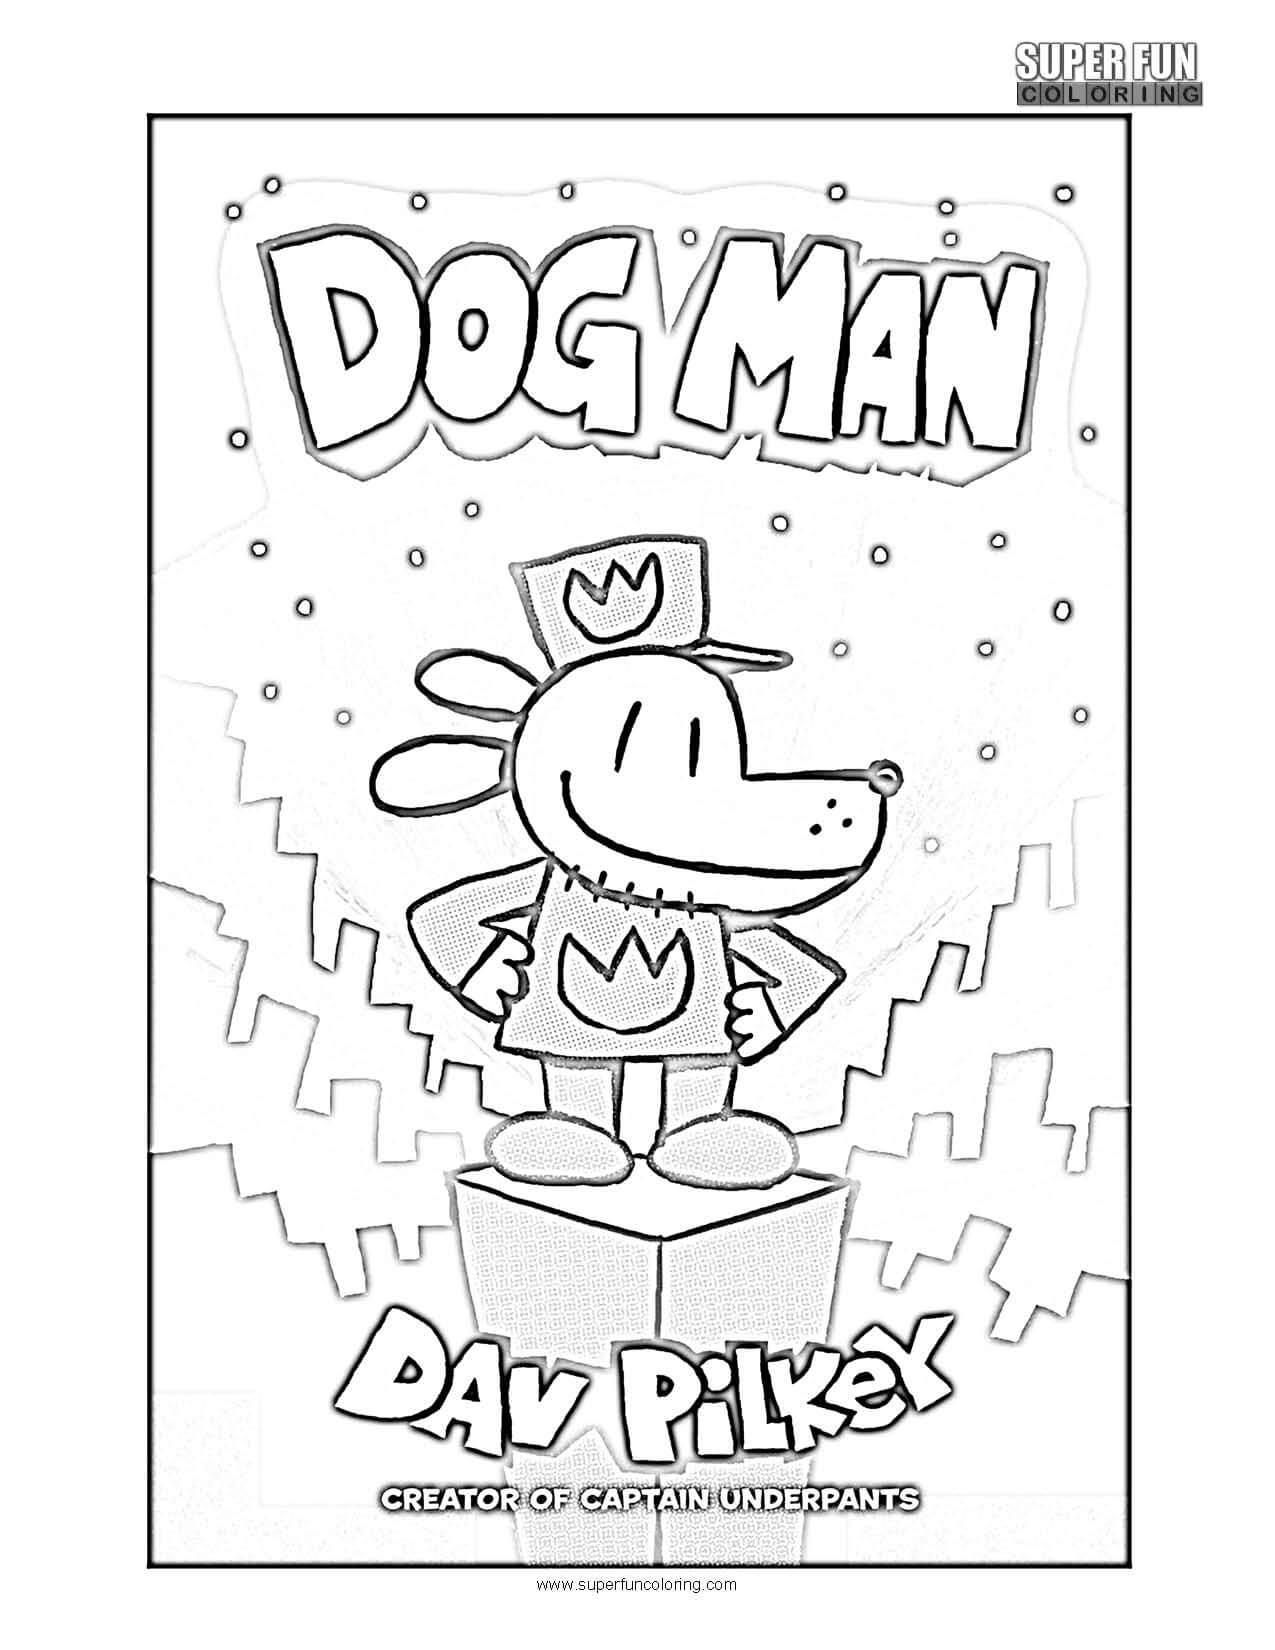 South Park Coloring Page Dogman Coloring Page Super Fun Coloring